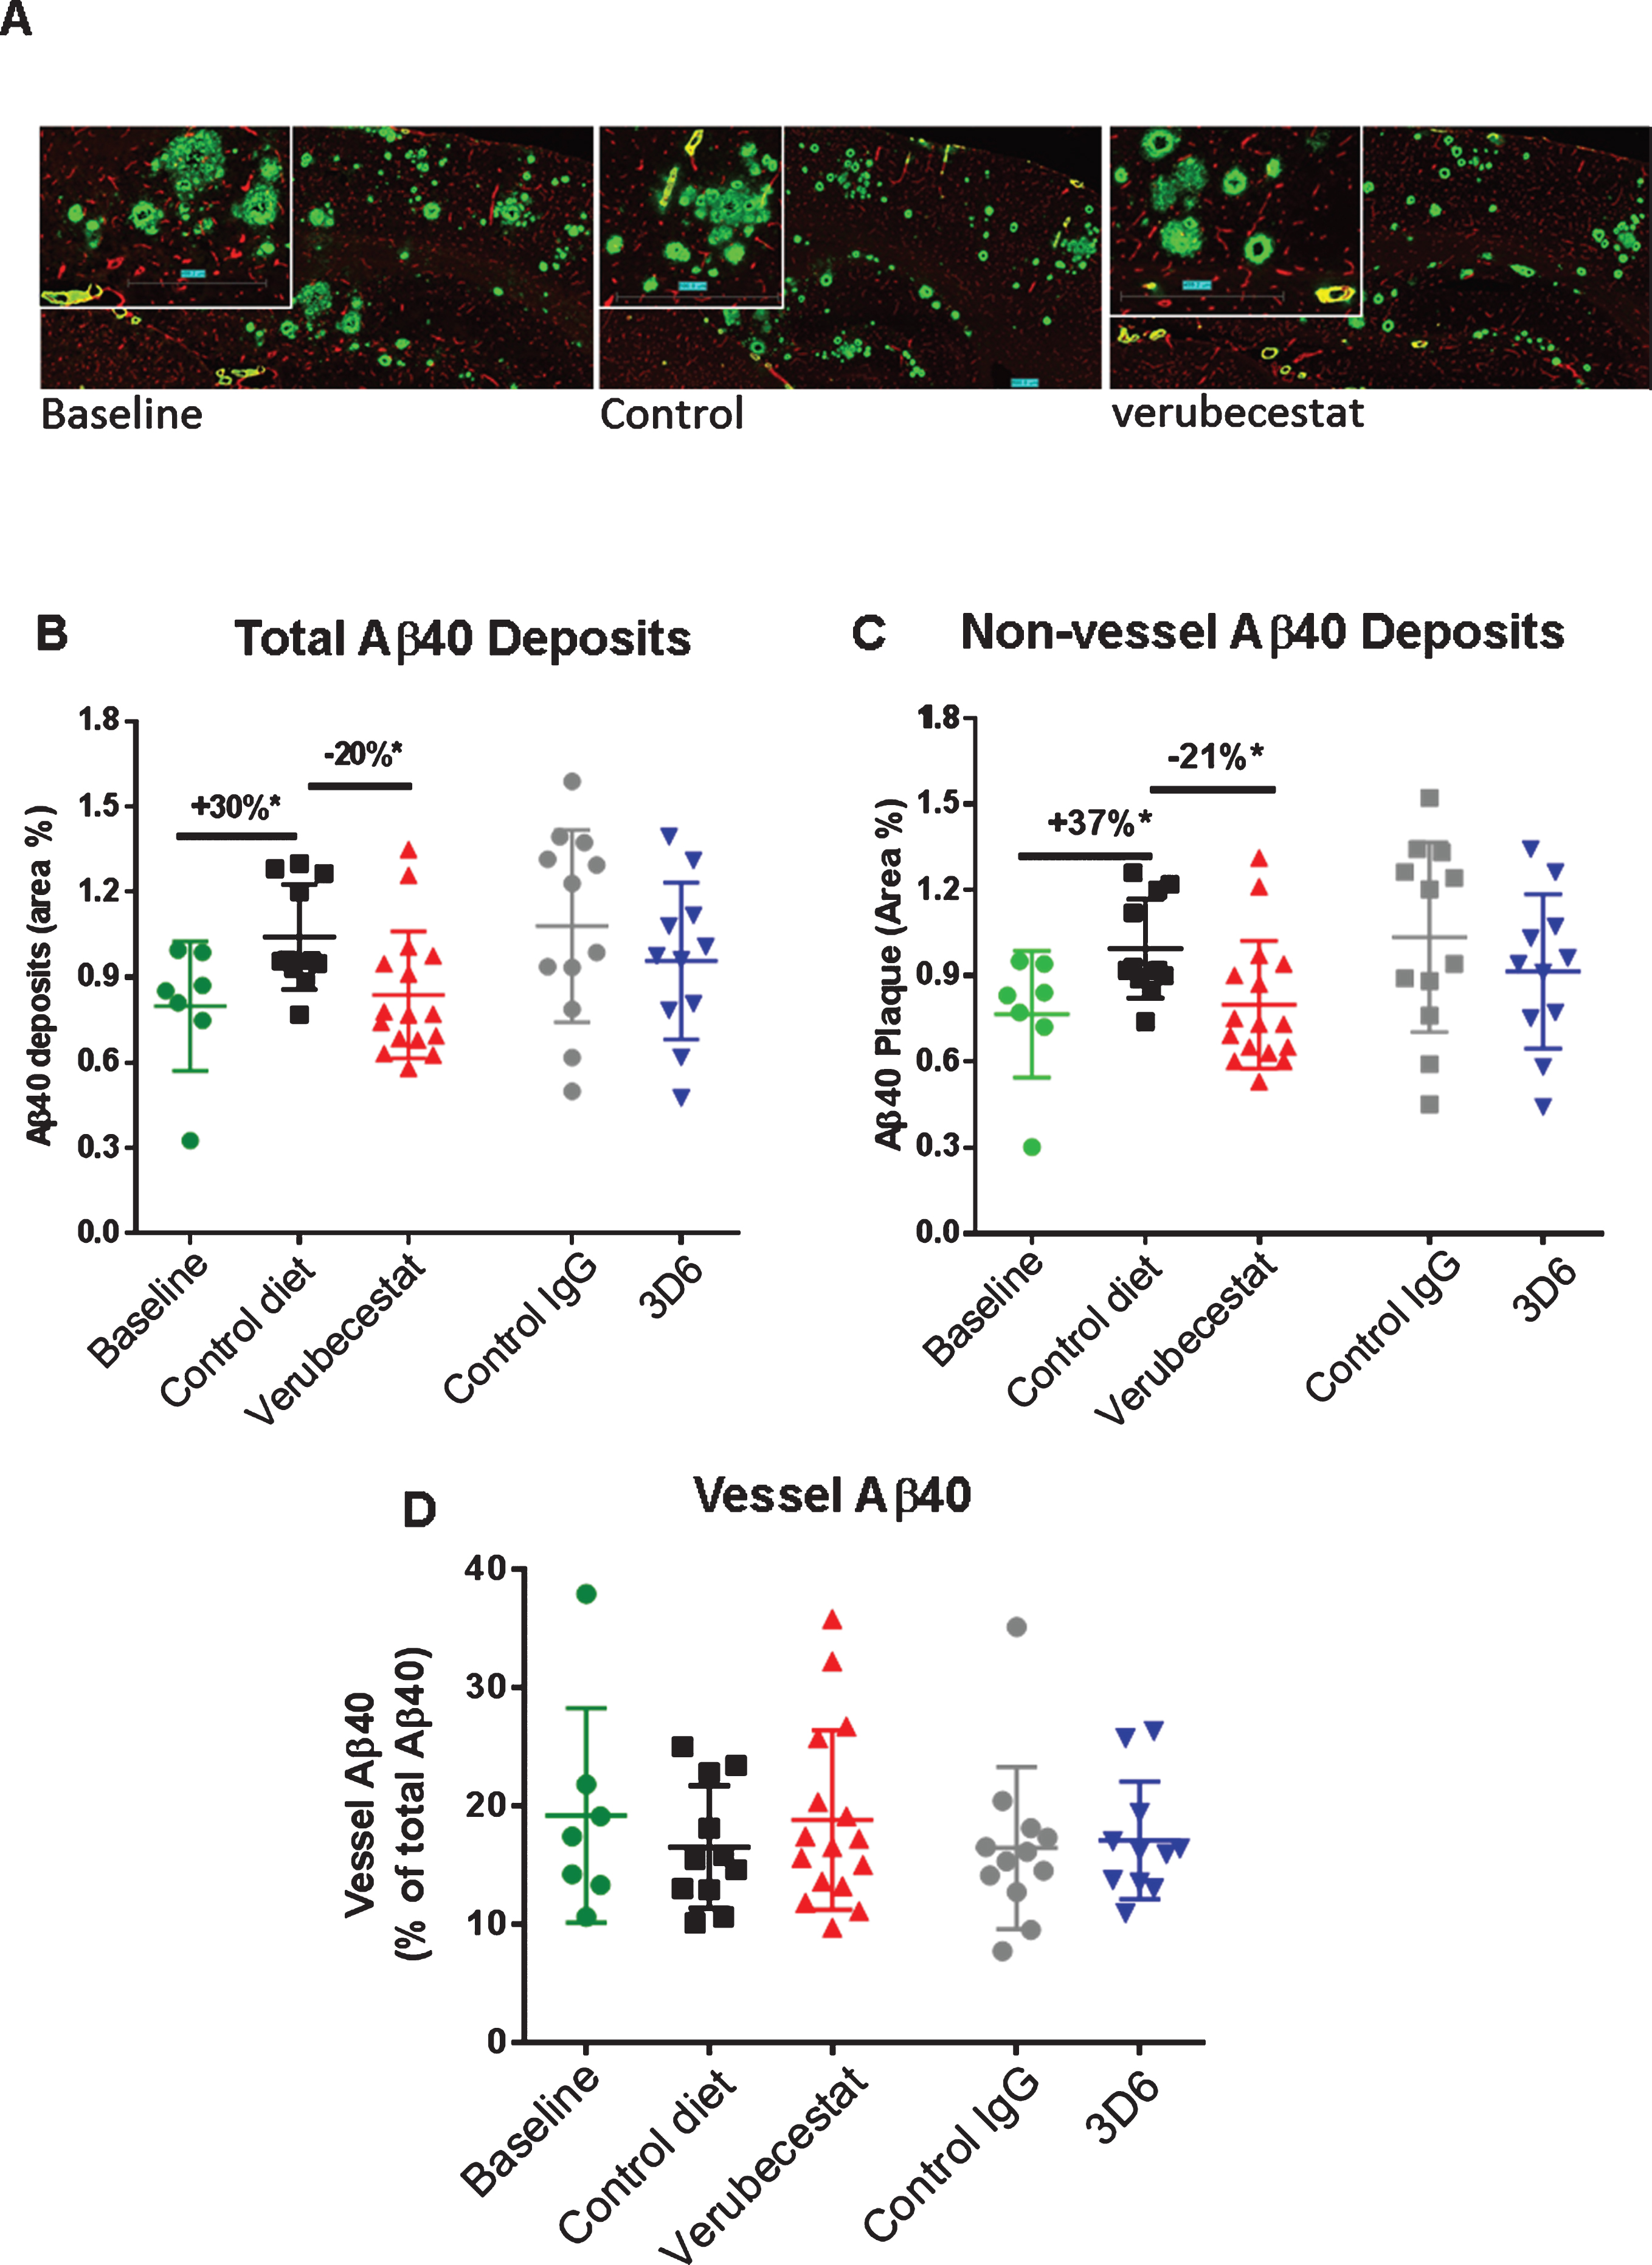 Analysis of total, non-vessel and vessel-associated anti-Aβ40 reactive deposits. A) Representative images of baseline (left), control (vehicle) diet-treated (middle), and verubecestat-treated mouse stained with the C-terminal specific anti-Aβ40 antibody, G2-10 (green) and with an anti-collagen IV antibody to label all blood vessels (red). Scale bar = 500 microns. Magnified insets are to allow for closer inspection of staining profiles. B) Fractional area of total Aβ40-immunoreactive deposits. C) Fractional area of non-vessel Aβ40 deposits determined by subtraction of the area of Aβ40 co-localized with collagen IV positive pixels from the total Aβ40 area and normalized to the total area of the region analyzed. D) The fraction of the Aβ40 deposits associated with vessels as defined by co-localization with collagen IV positive pixels. *p < 0.05, two-tailed t-tests (pairwise). Data are mean±sd.